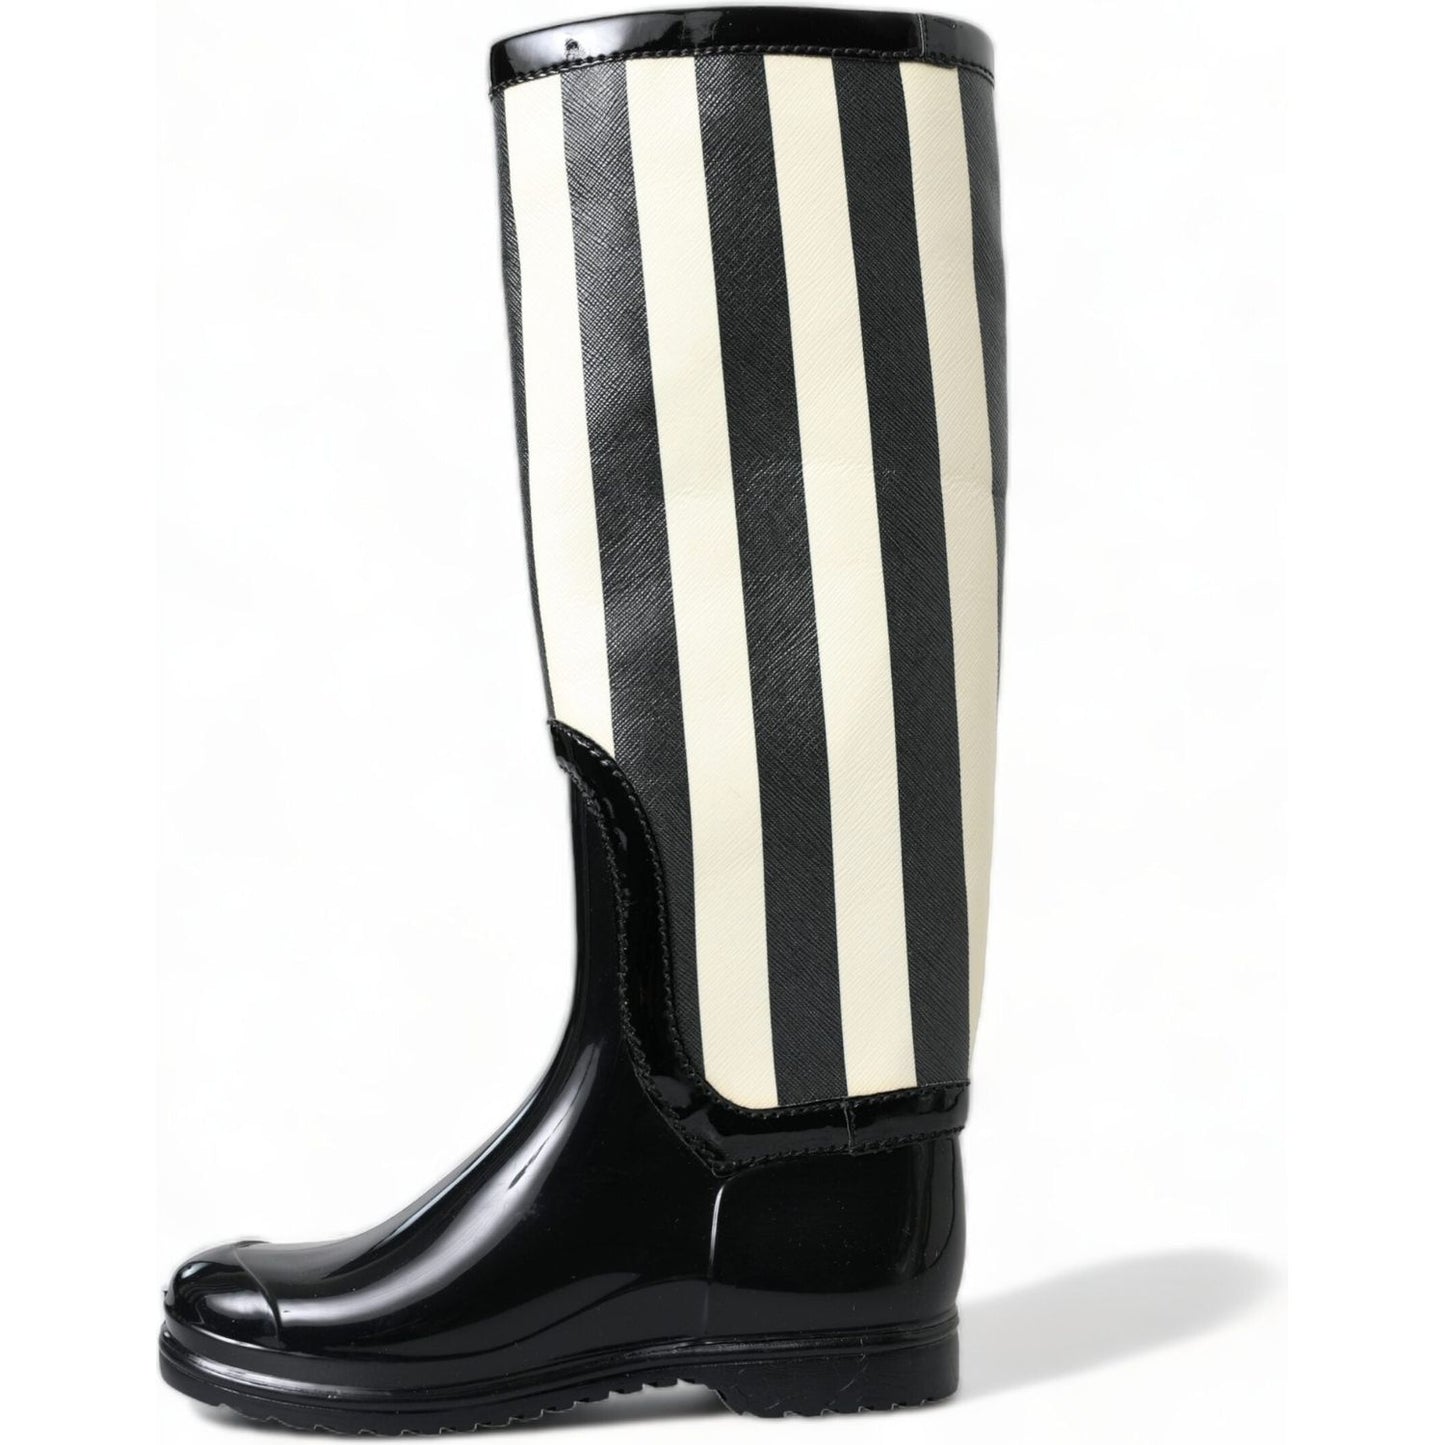 Dolce & Gabbana Black and White Striped Knee High Boots black-rubber-knee-high-flat-boots-shoes